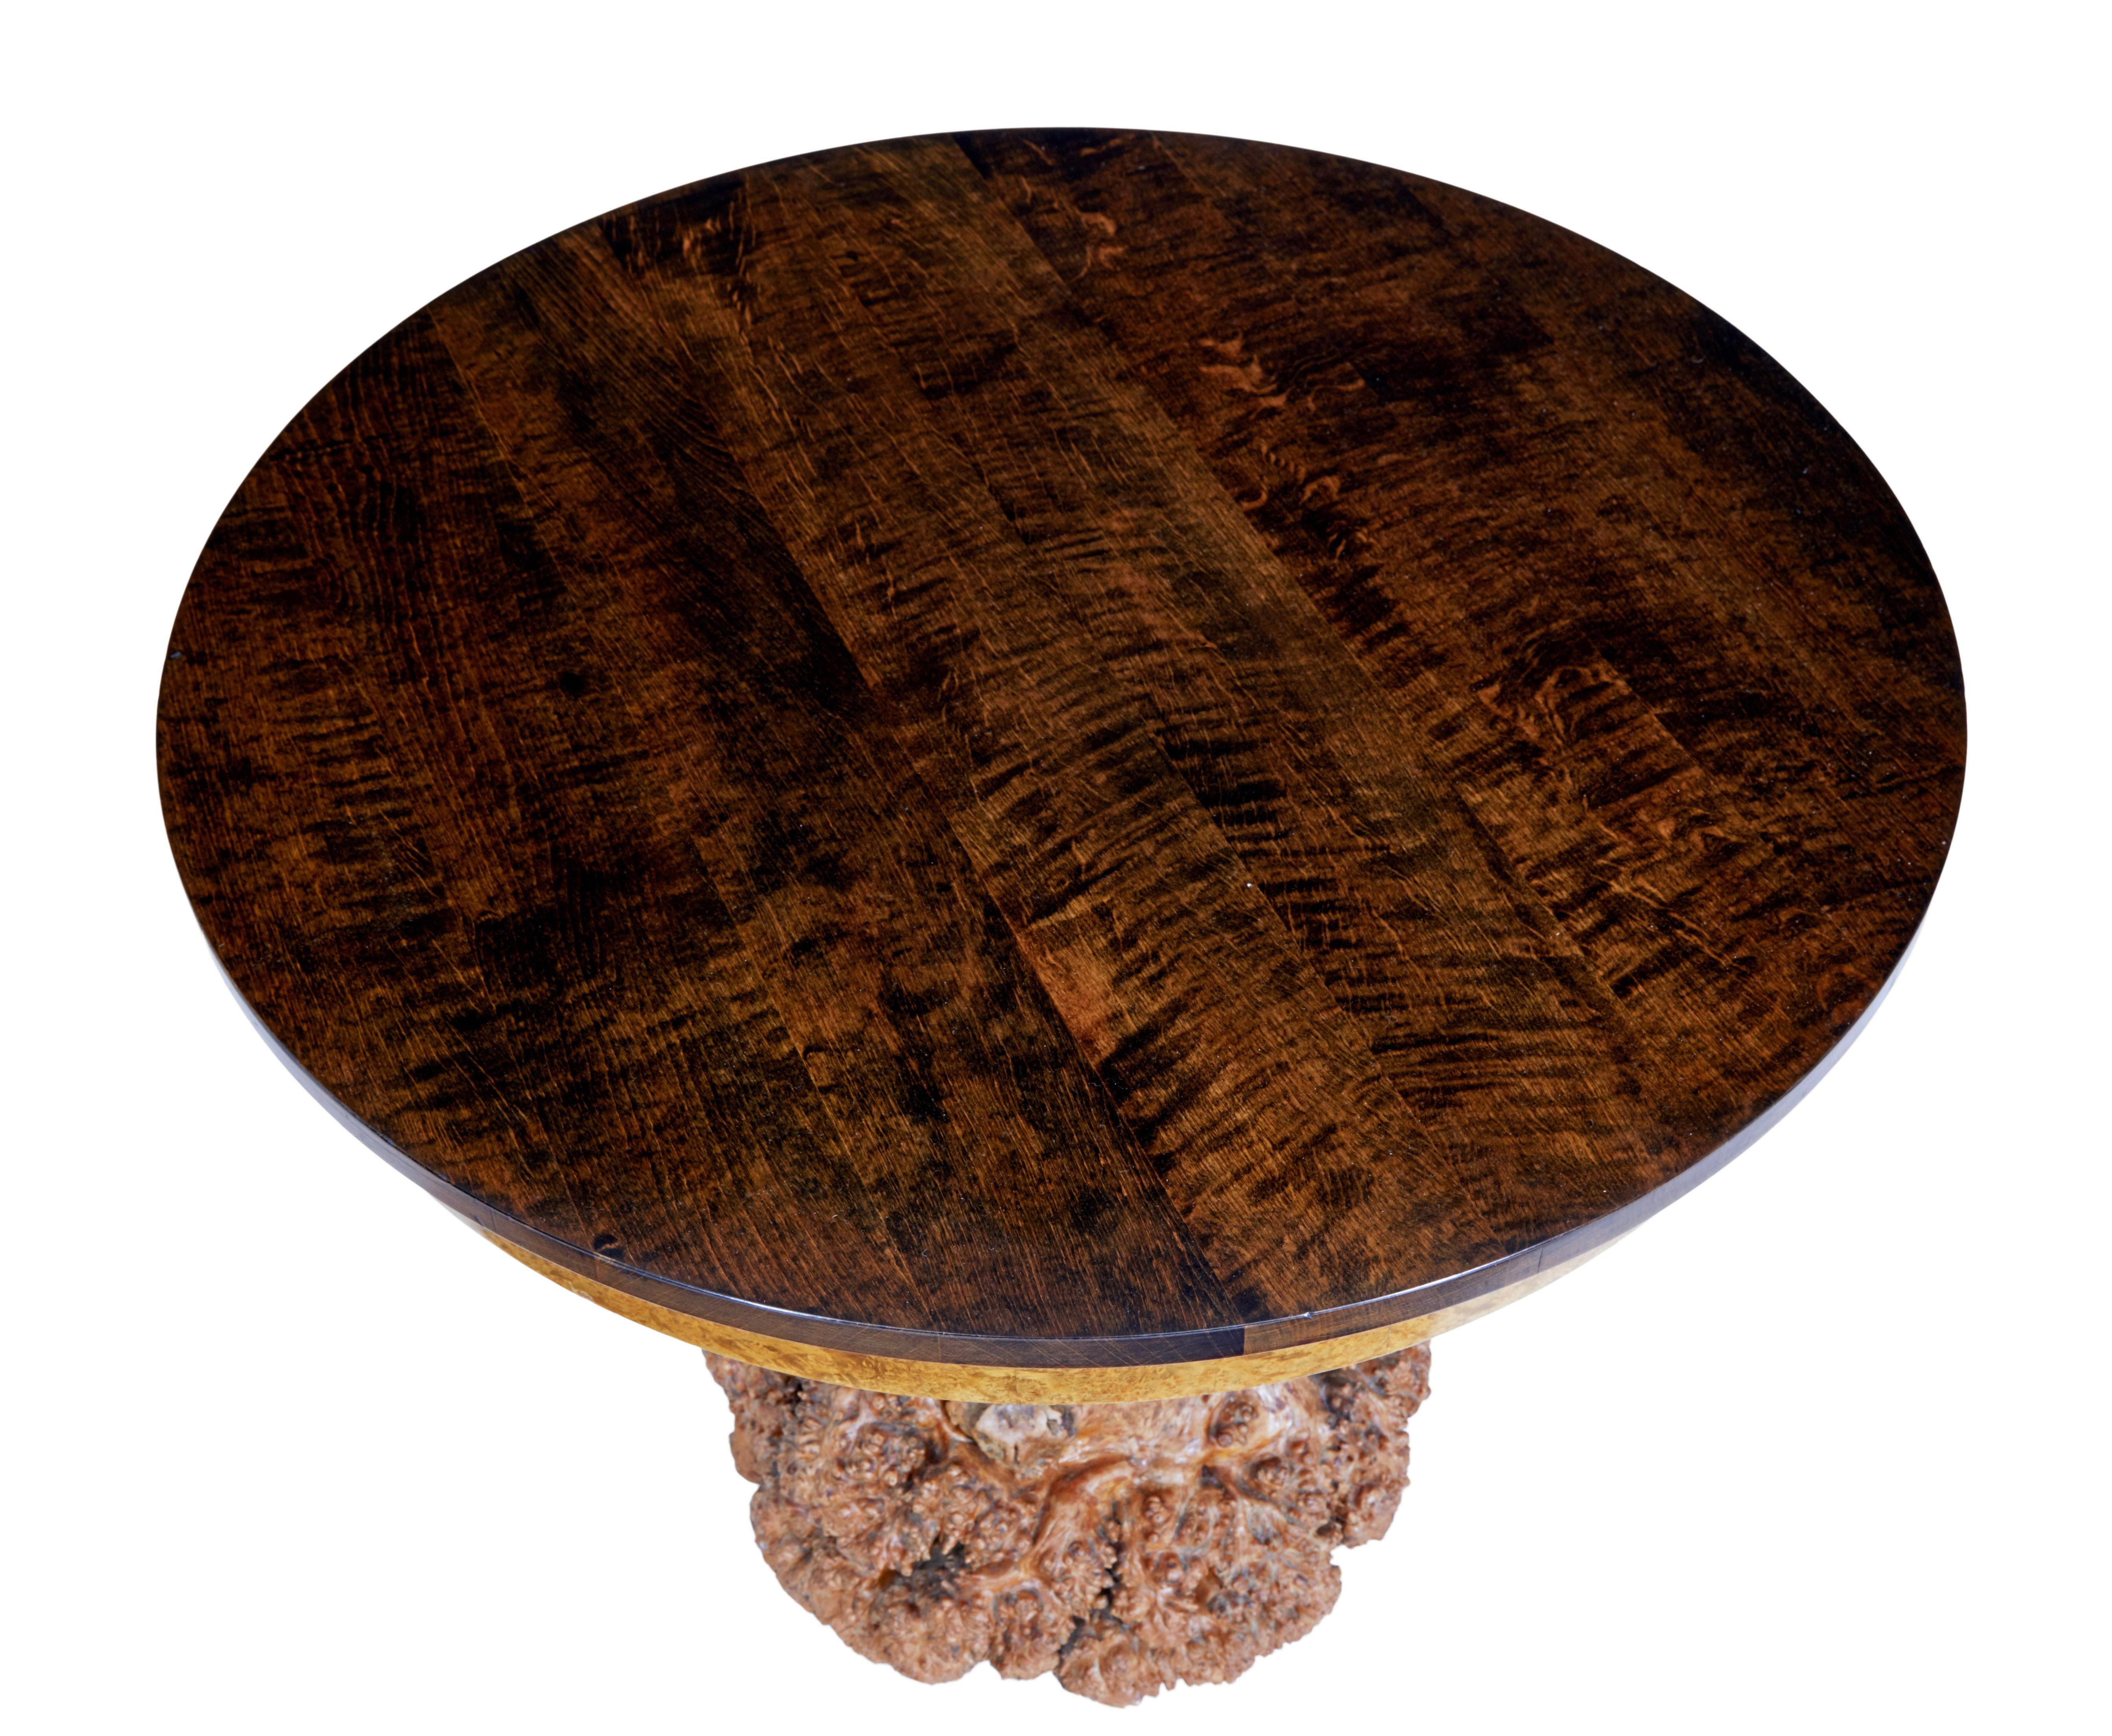 Unusual circular occasional table with burr root base circa 1930.

Recently re-polished dark stained circular birch top with burr frieze, standing on burr root base which has been adapted to work as a base.

Rich golden colour.

Minor surface marks,